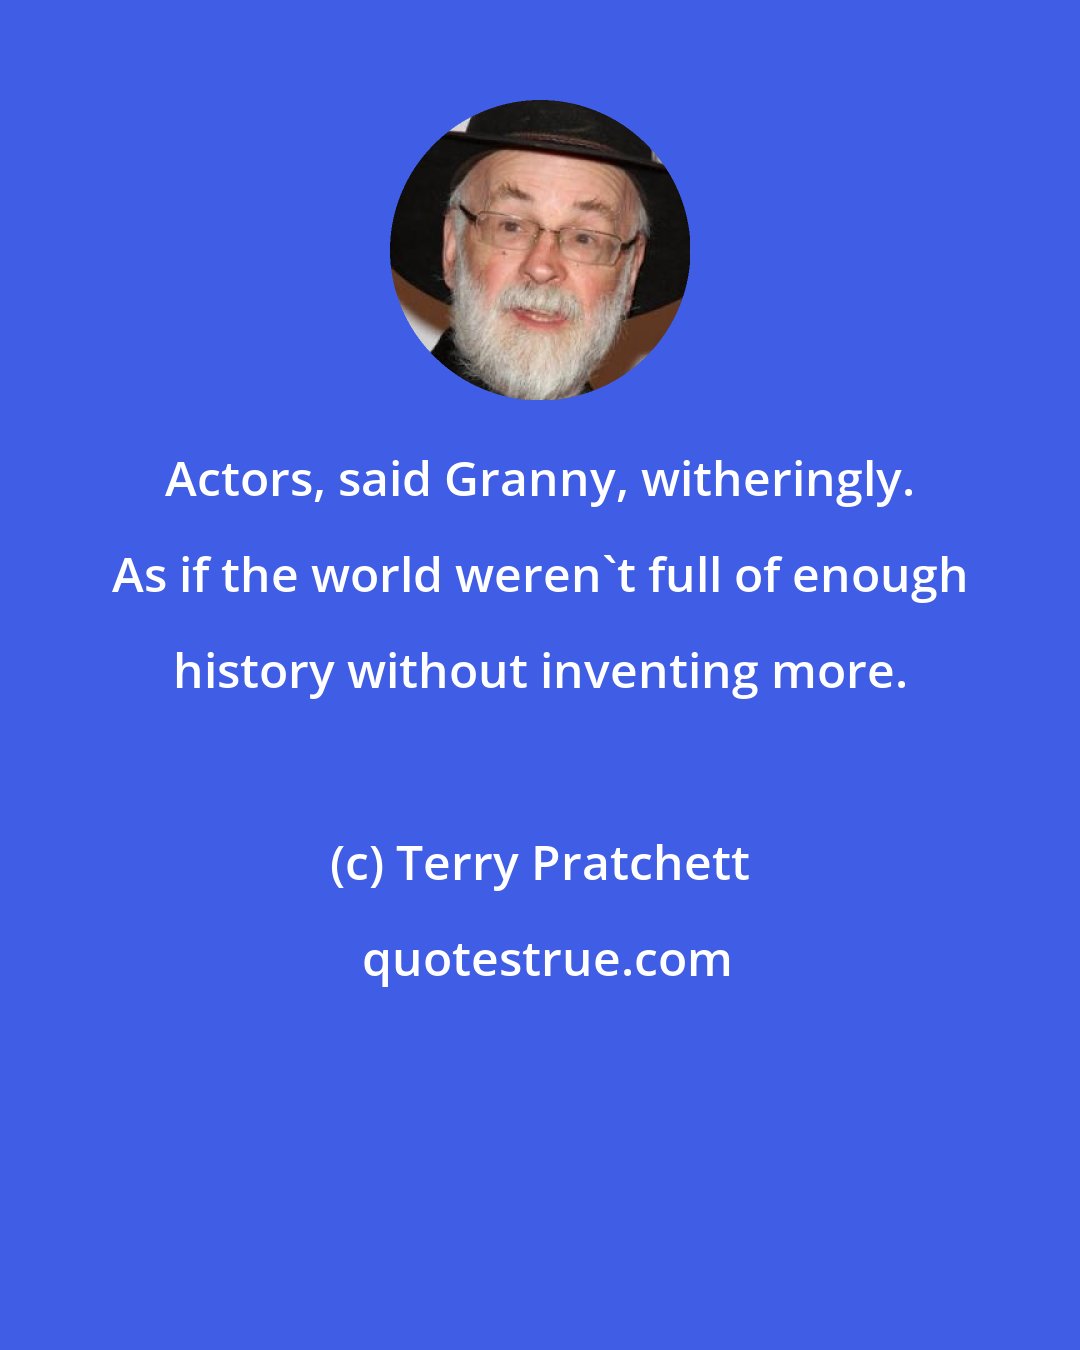 Terry Pratchett: Actors, said Granny, witheringly. As if the world weren't full of enough history without inventing more.